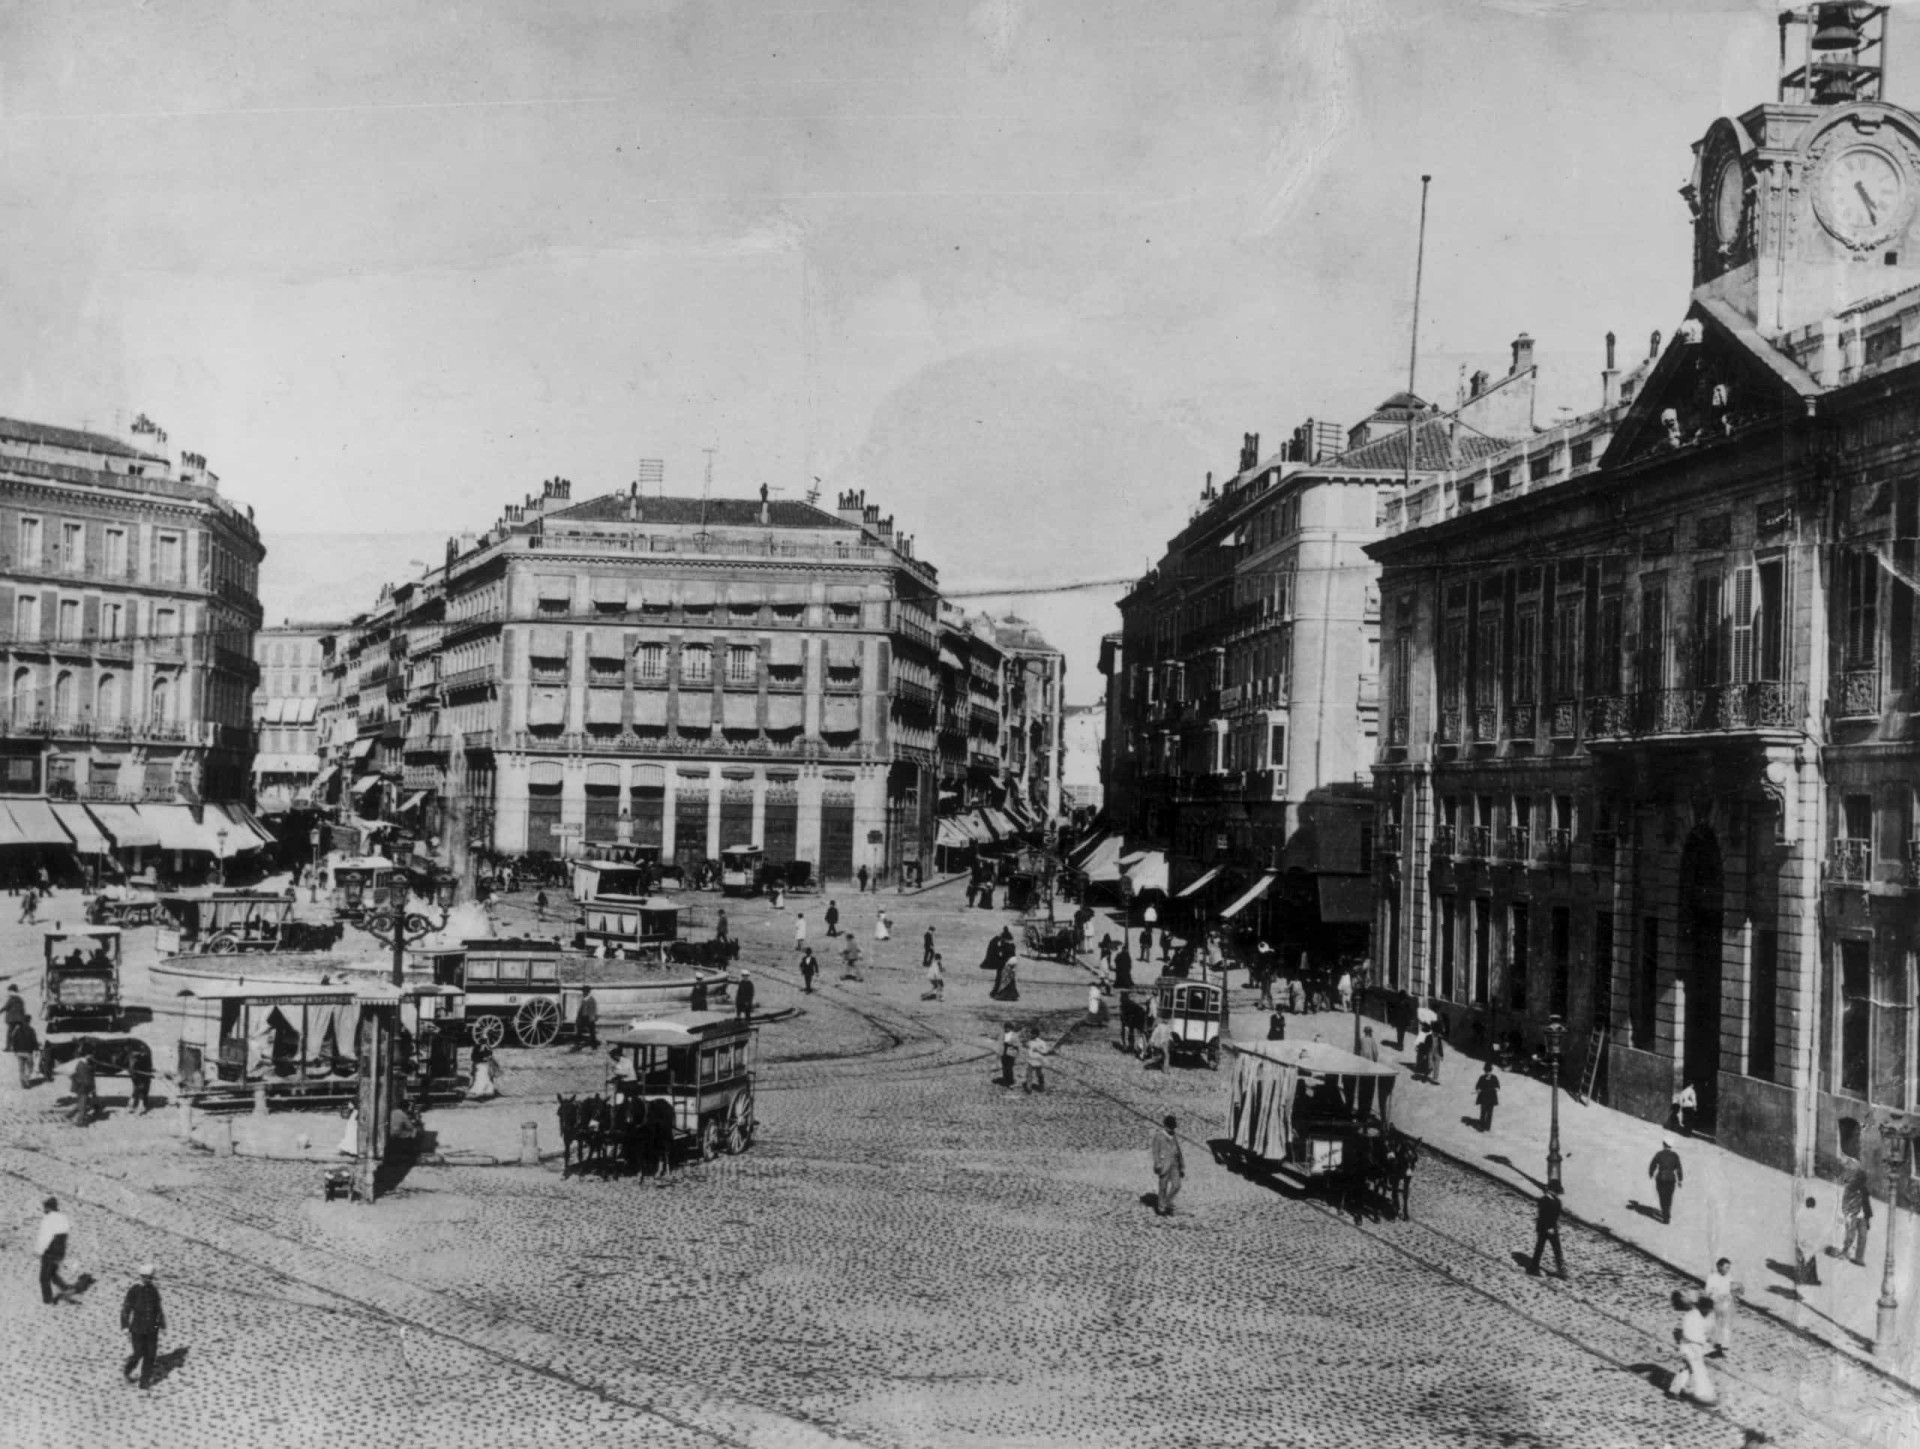 Madrileños may recognize Sol, the city's traditional center. Here are horse-drawn trams carrying goods around in 1880.